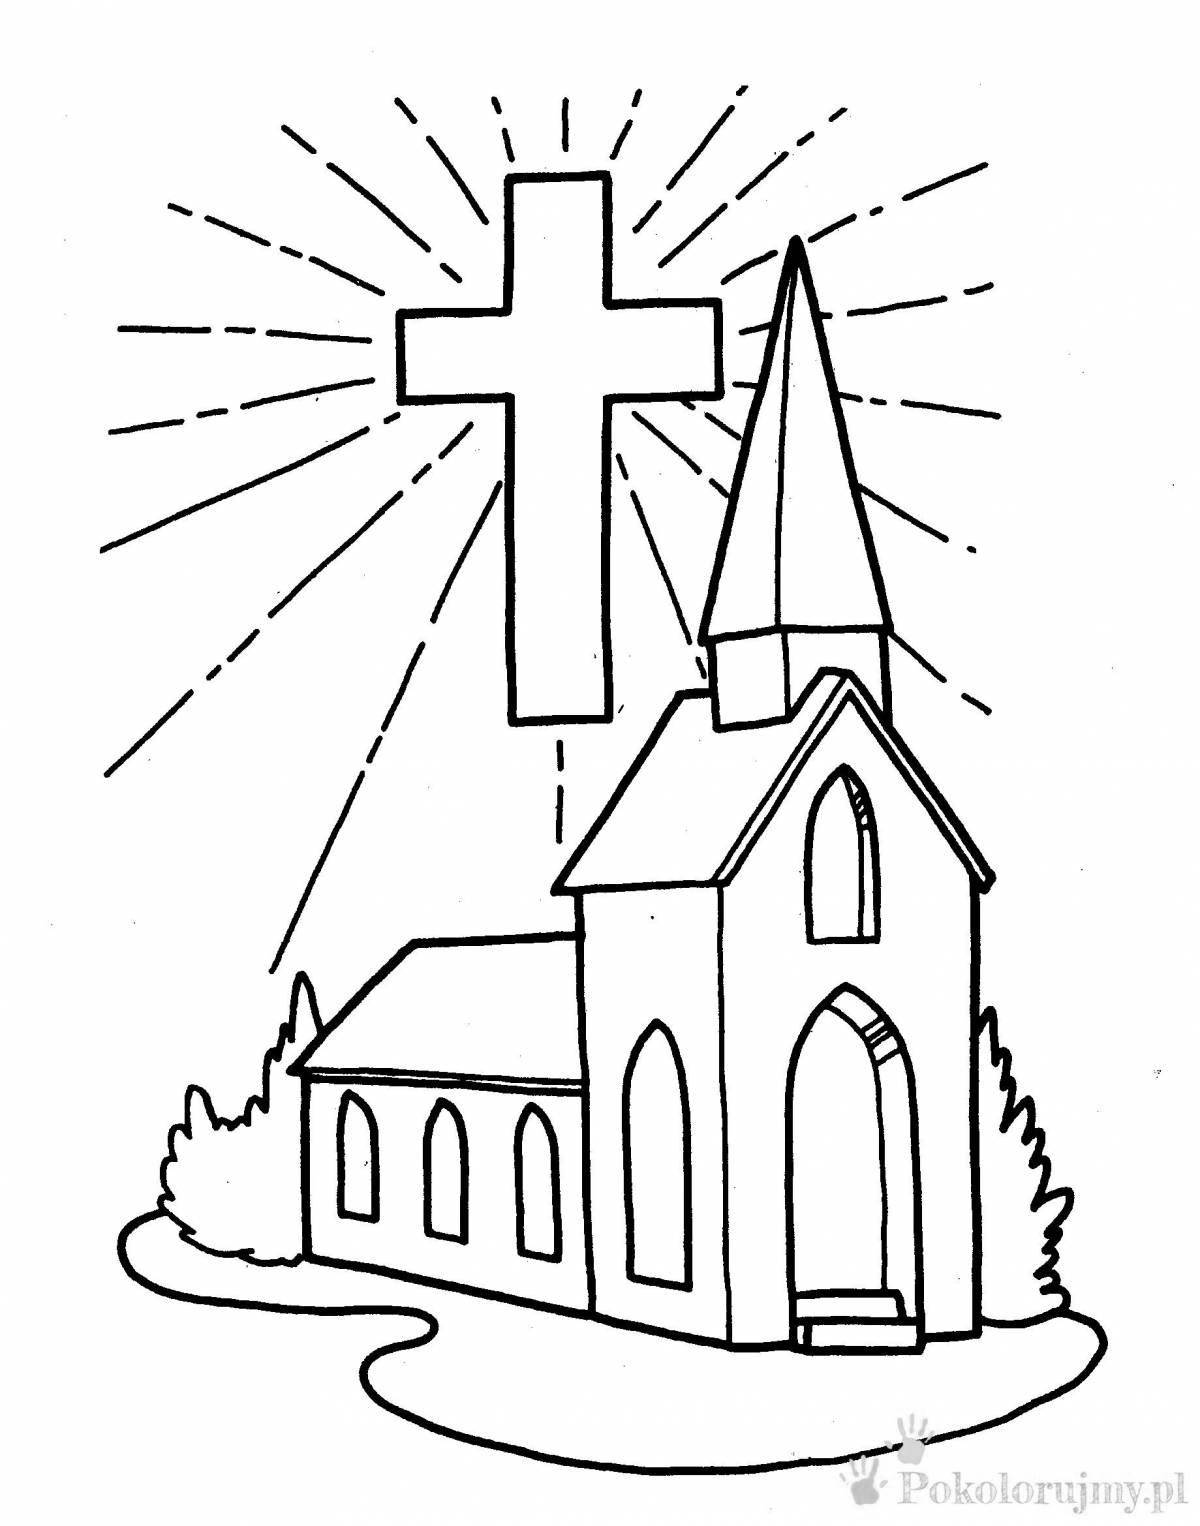 Glowing coloring pages temples and churches for kids